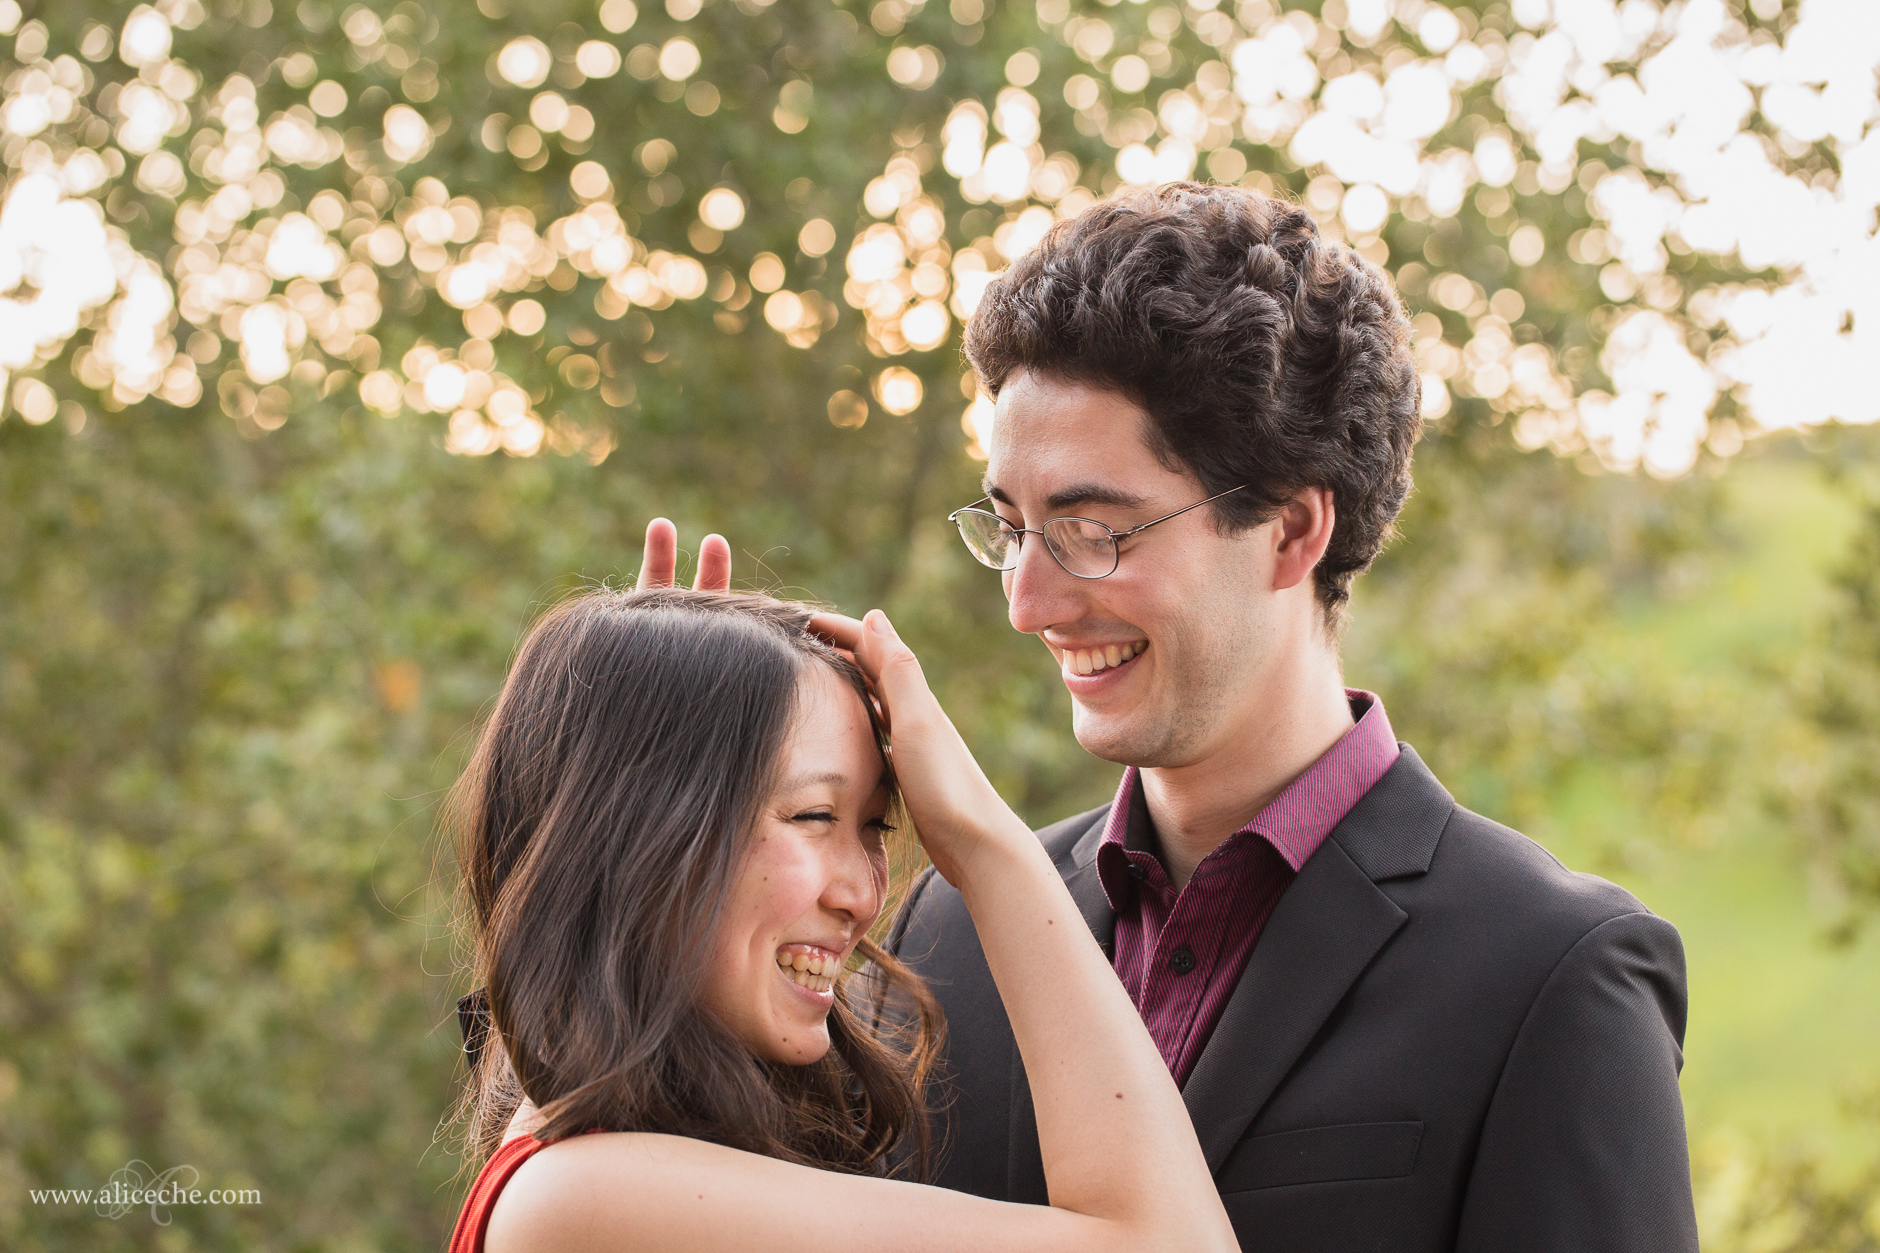 alice-che-photography-valentines-day-session-fan-couple-bay-area-engagement-photographer-laughing